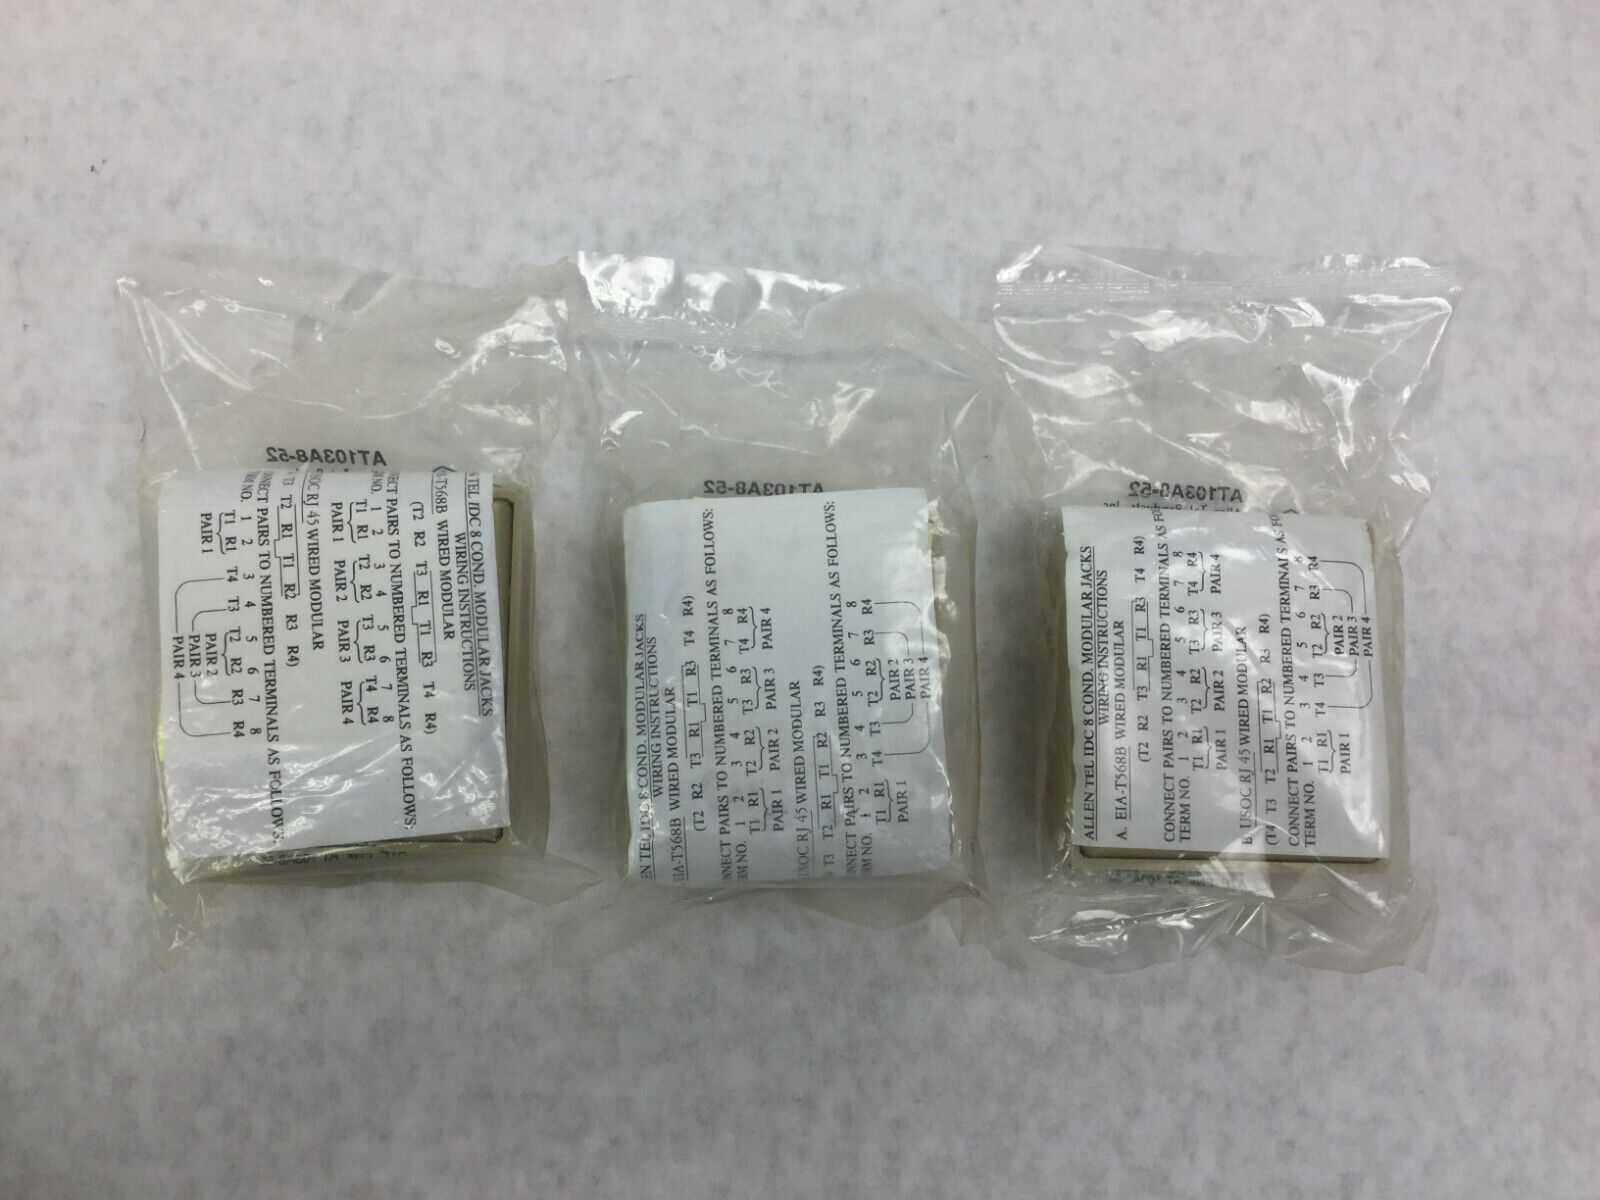 Allen Tel Products AT103A8-52  Communications Circuit Accessory Lot of 3